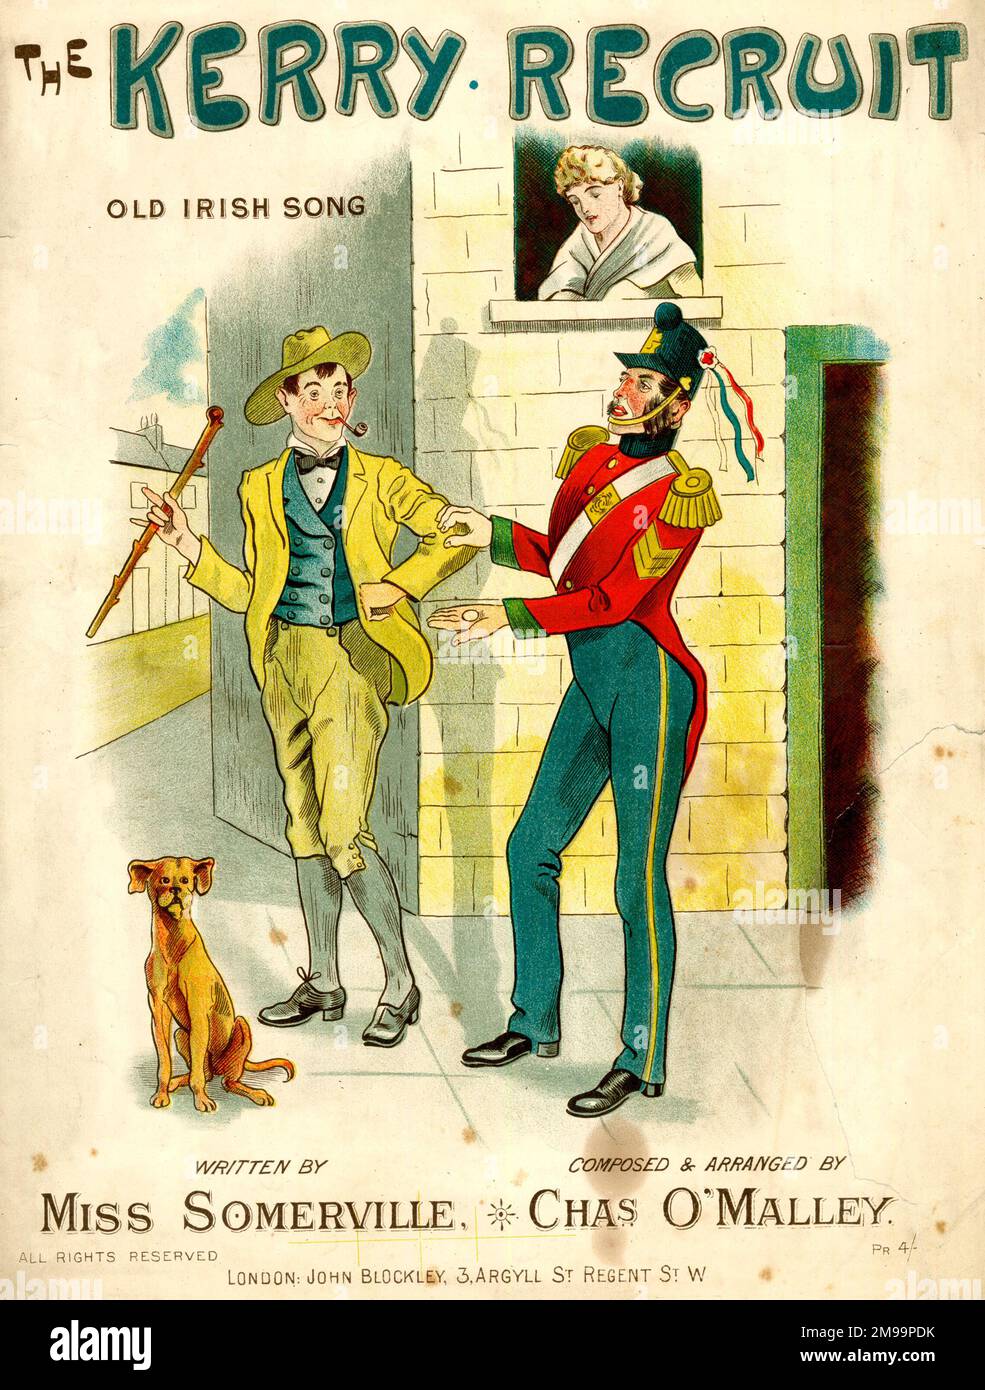 Music cover, The Kerry Recruit, Old Irish Song, written by Miss Somerville, composed and arranged by Charles O'Malley. Stock Photo